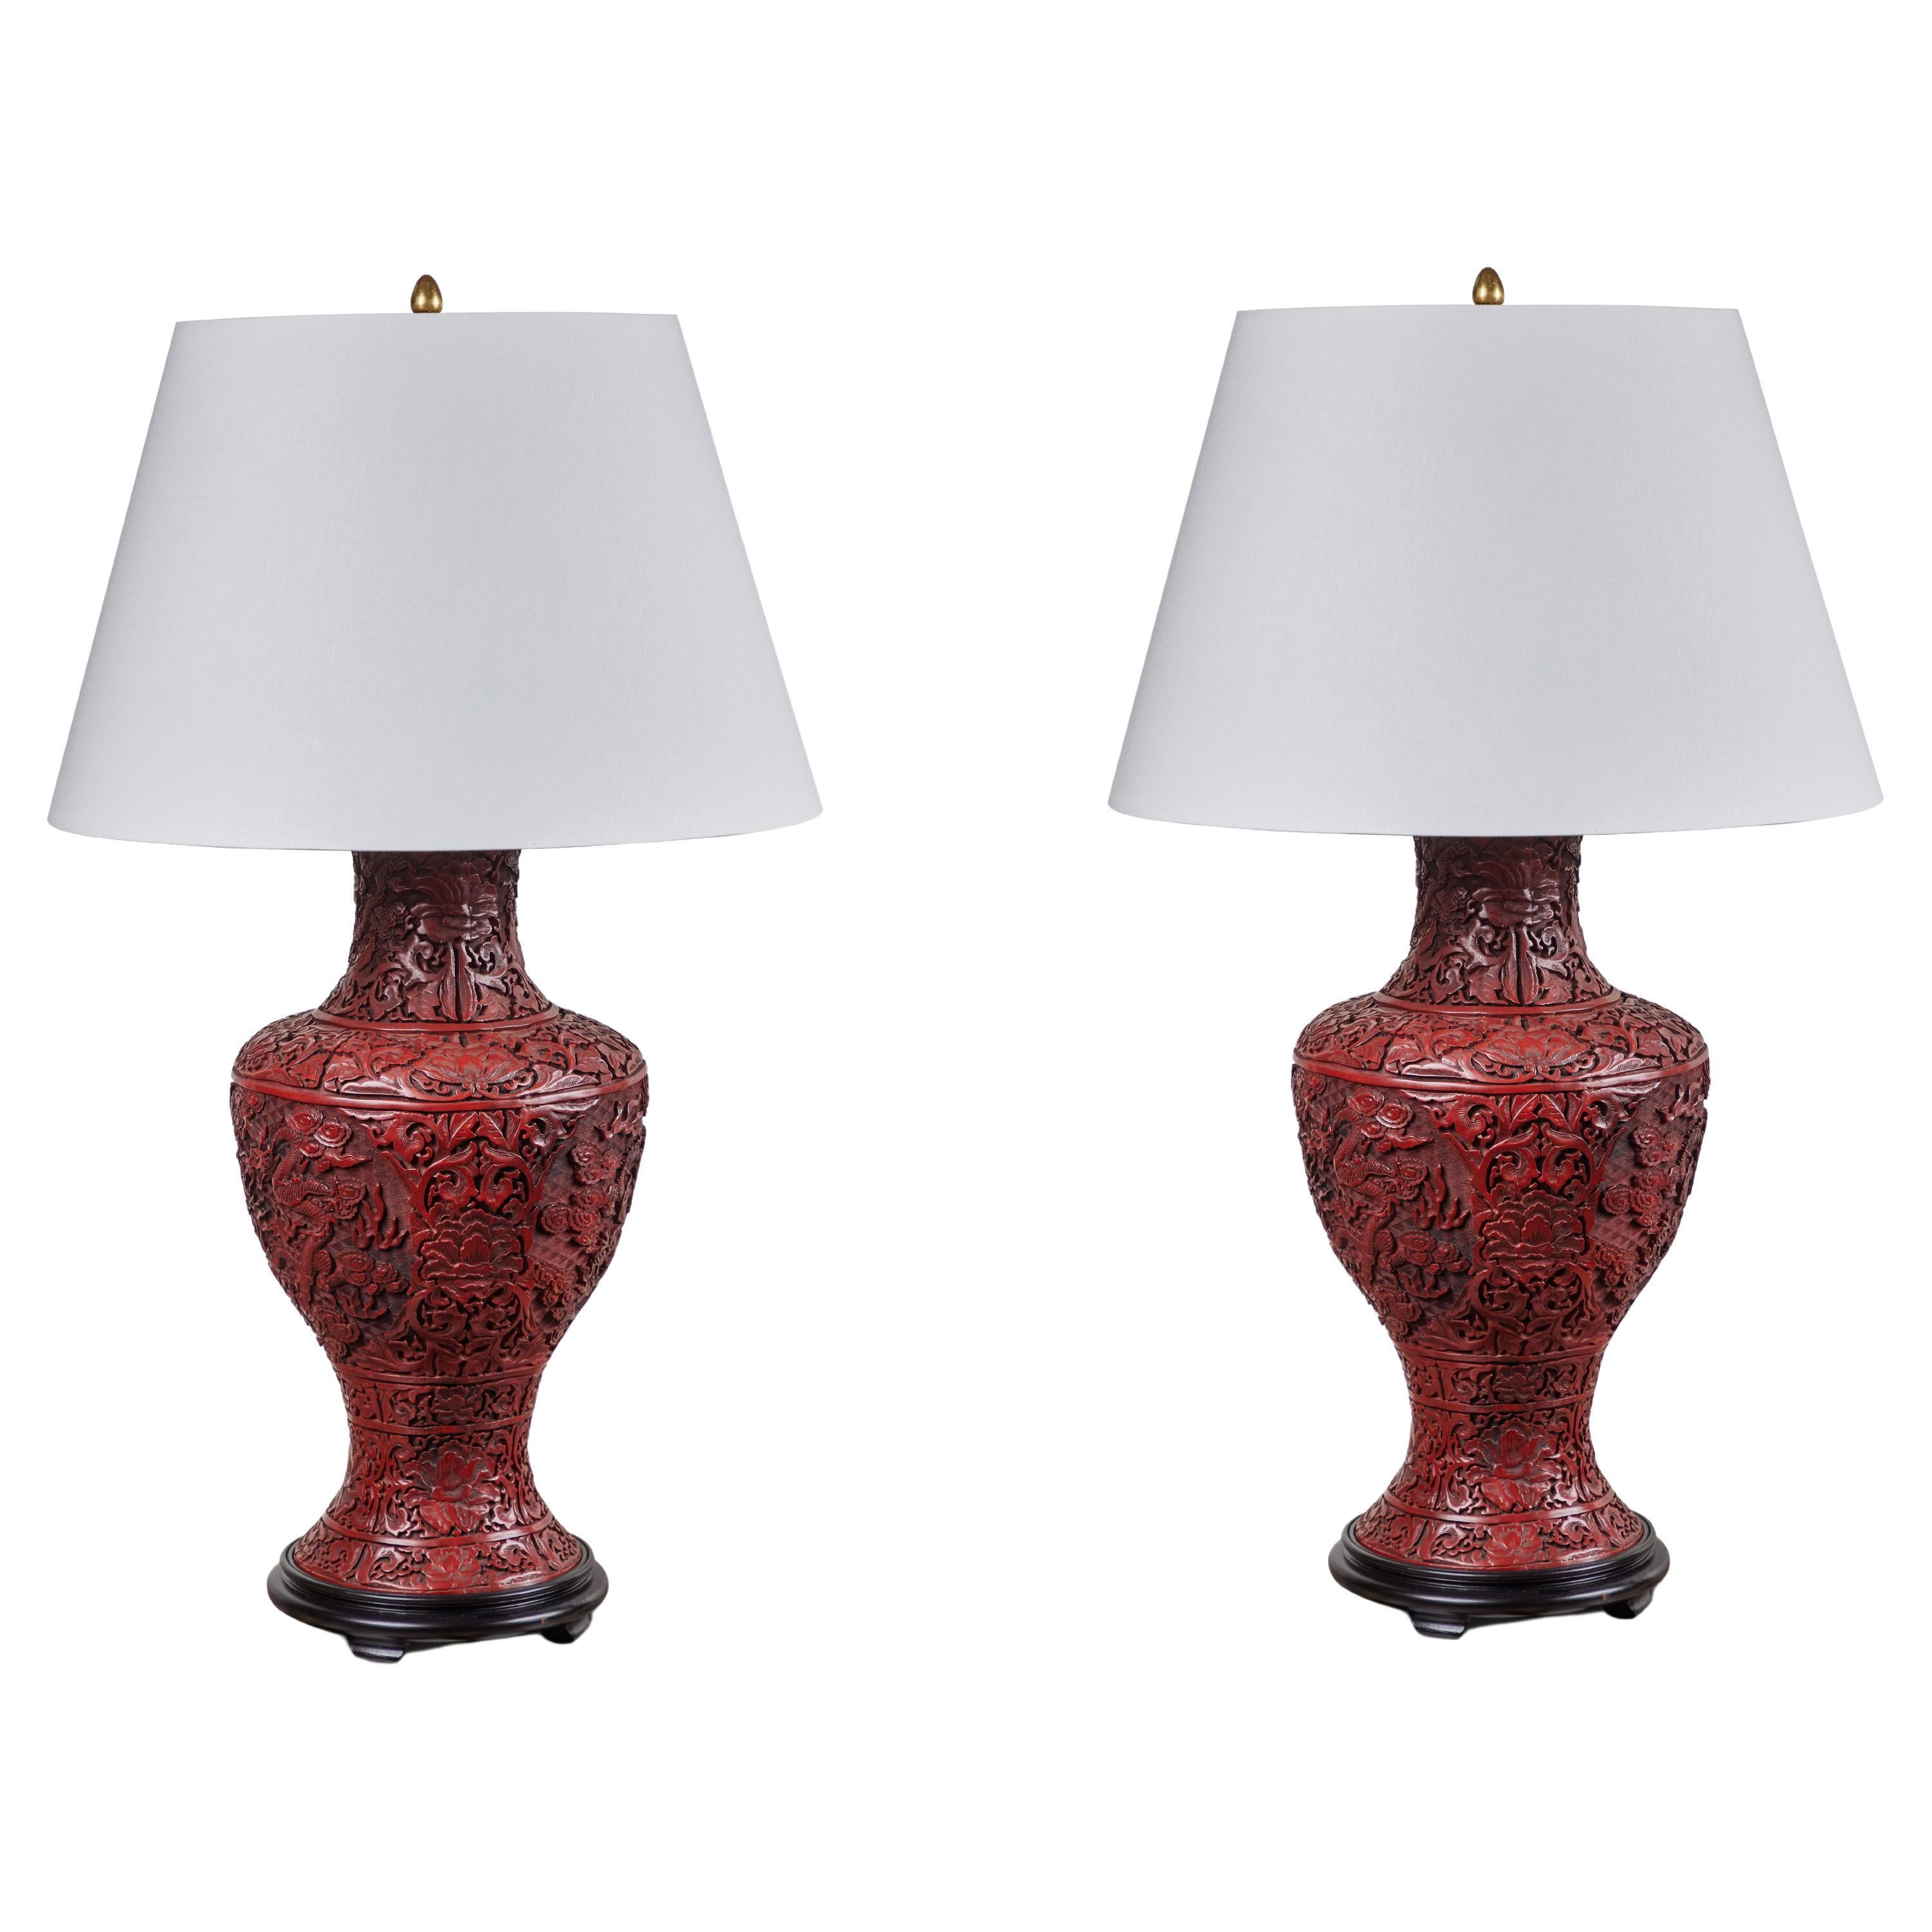 Large, Republic Period, Cinnabar Lamps For Sale